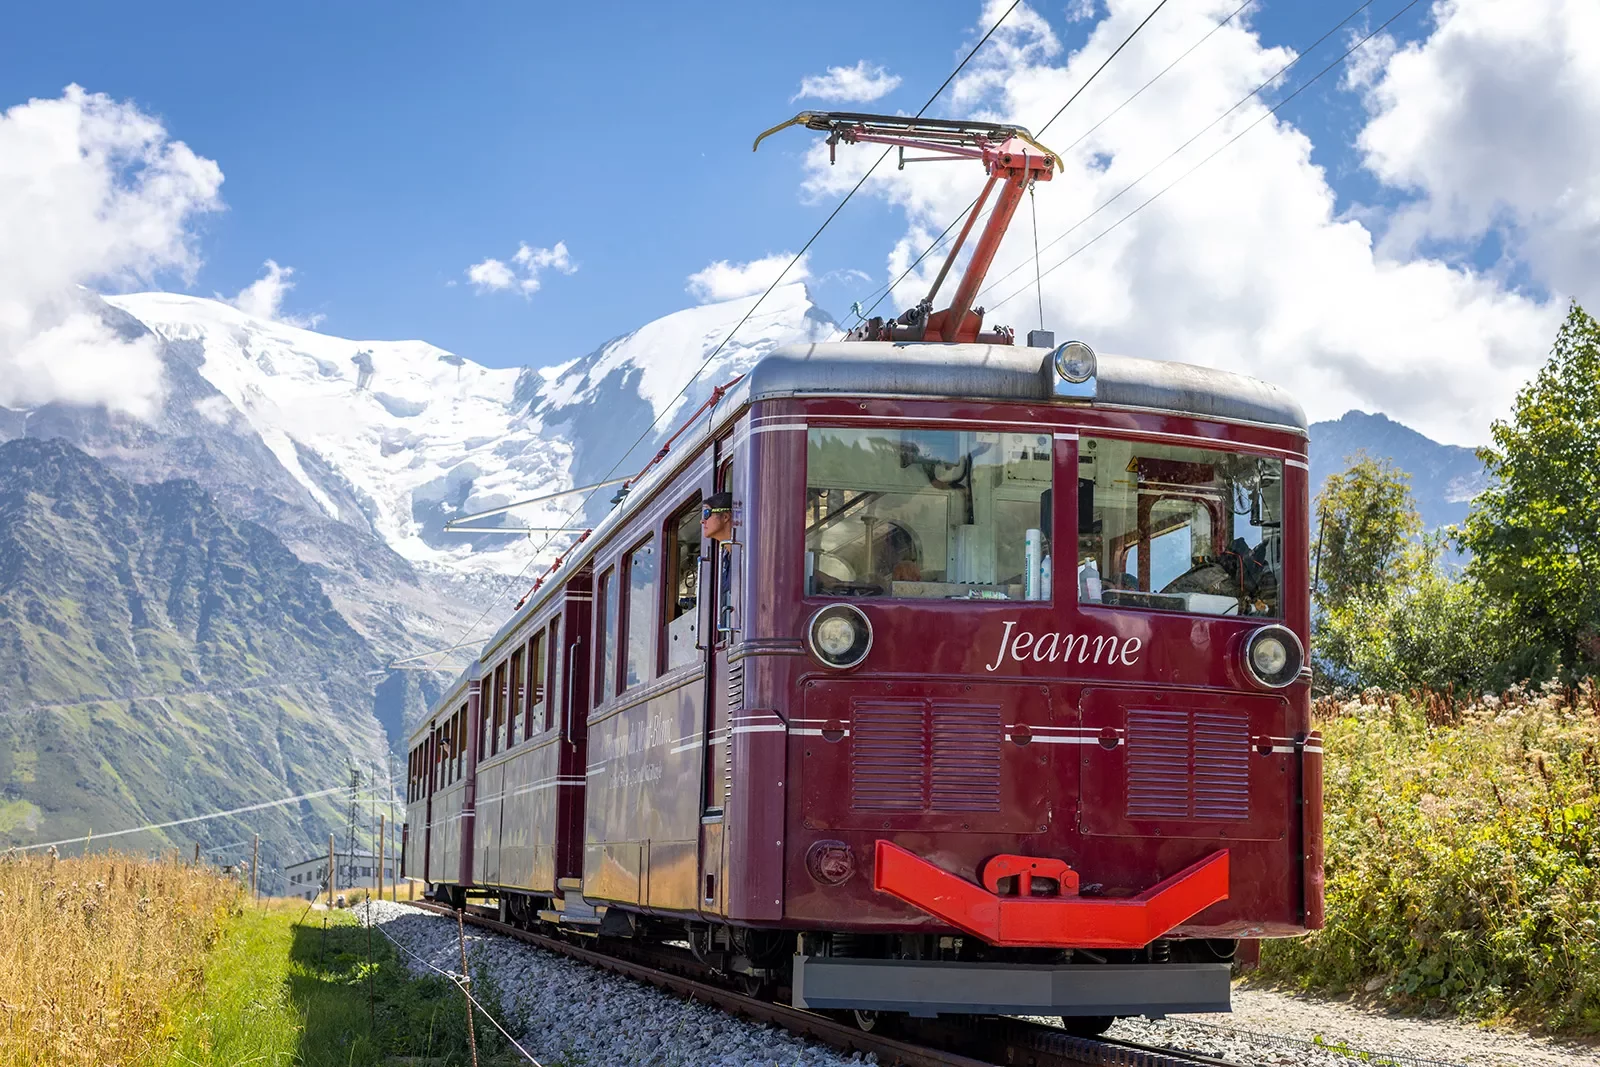 Shot of a red train, &quot;Jeanne&quot;, mountains &amp; clouds behind it.